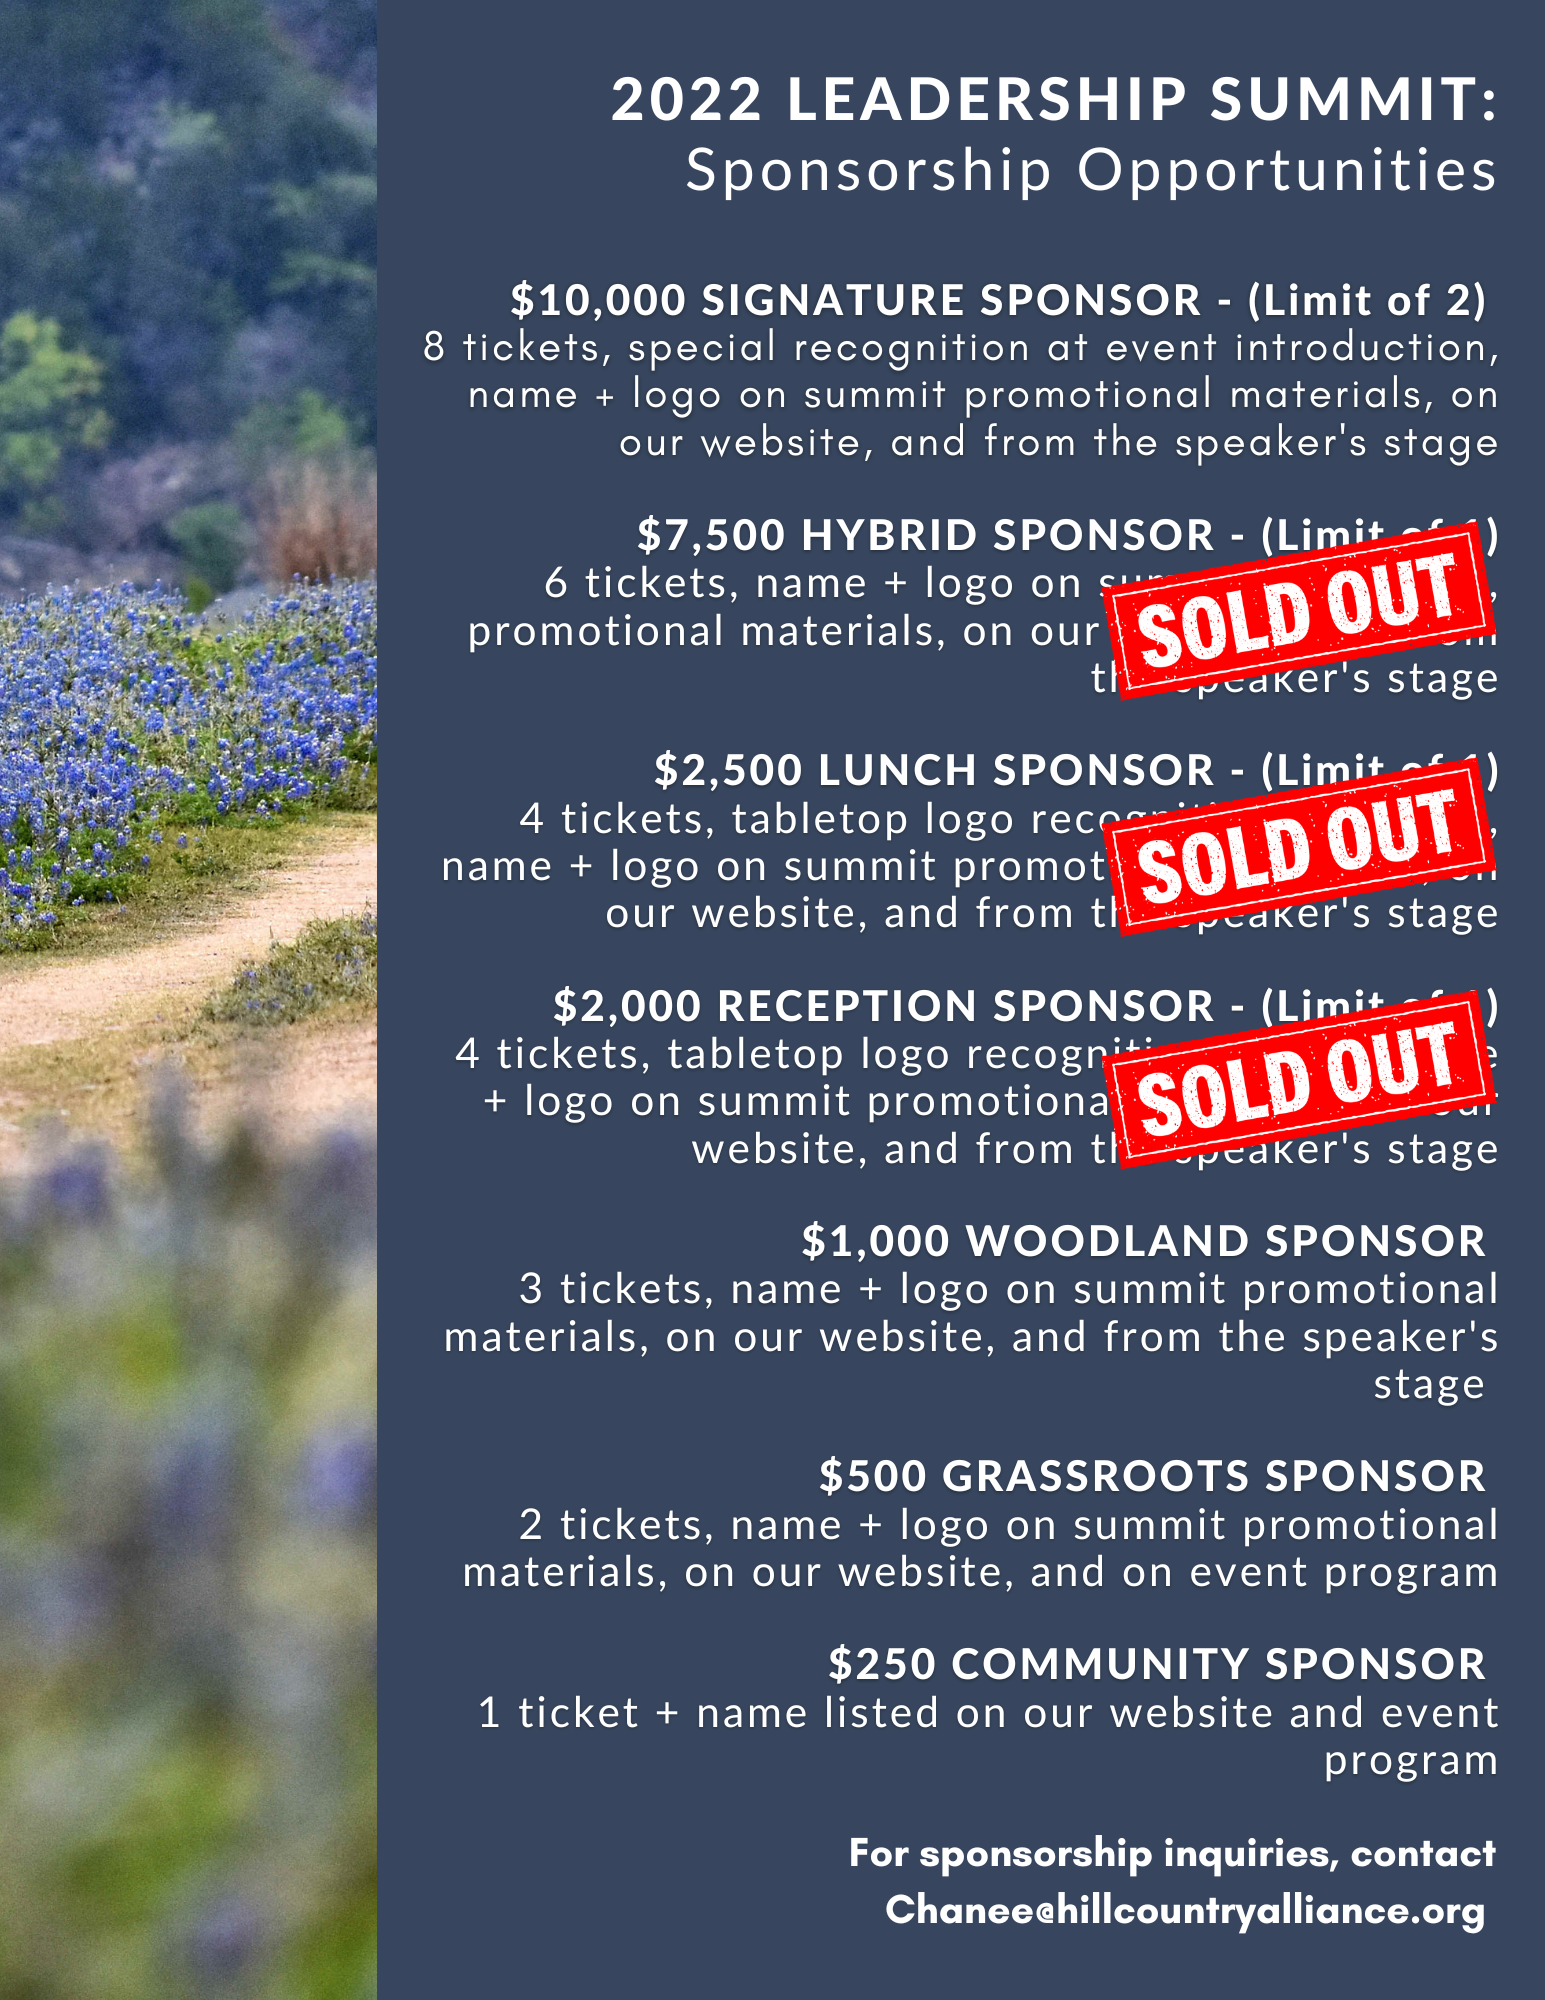 Back cover of 2022 Hill Country Leadership Summit Sponsorship Packet - click to read PDF outlining sponsorship levels. $2000 Reception and $2500 Lunch Sponsor level is sold out - other opportunities exist.